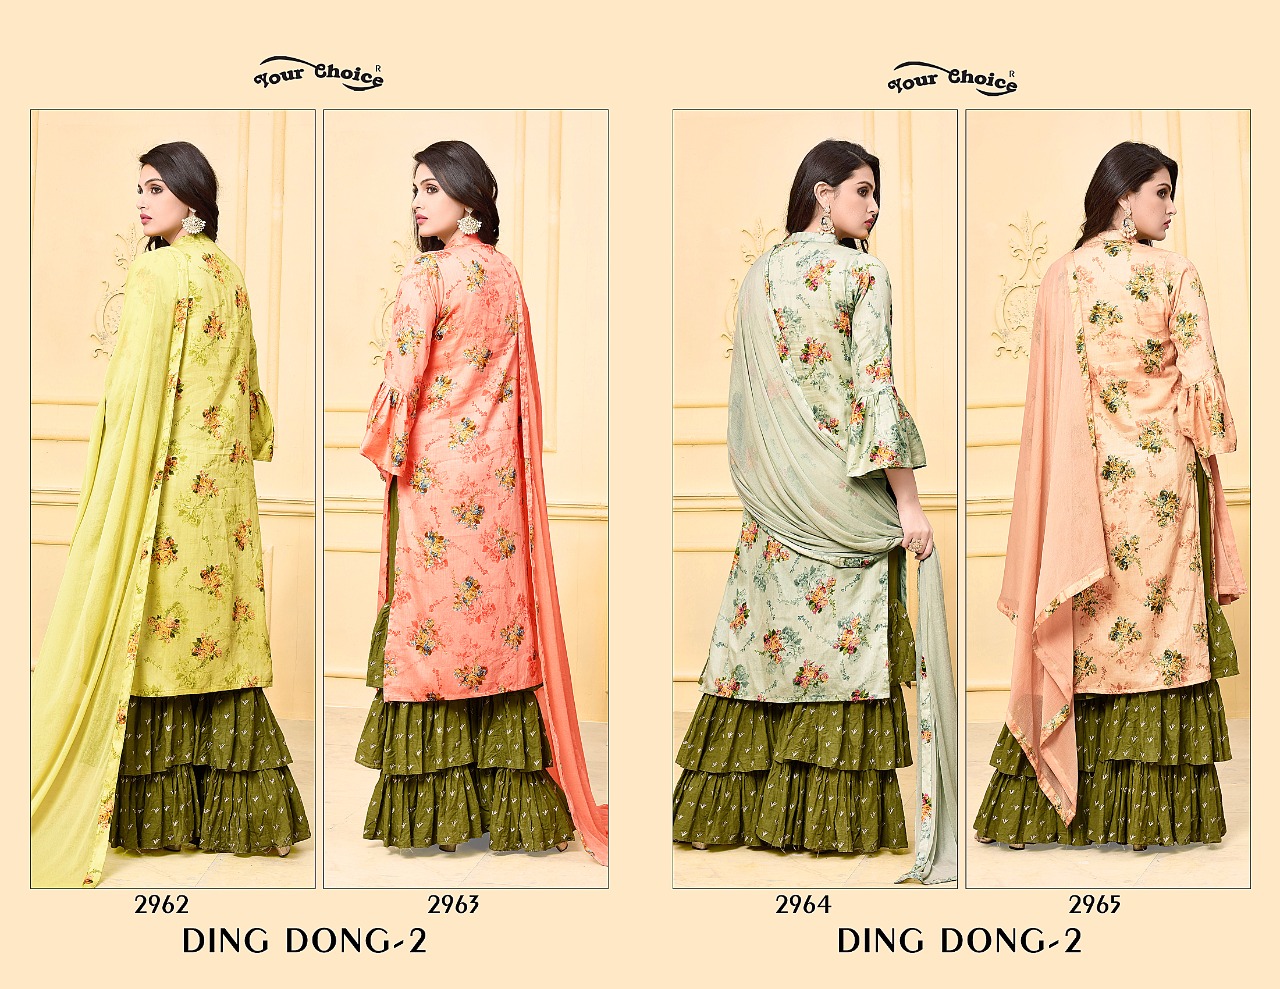 Your choice presenting ding dong 2 stylish new pattern sarara with digital printed salwar kameez concept